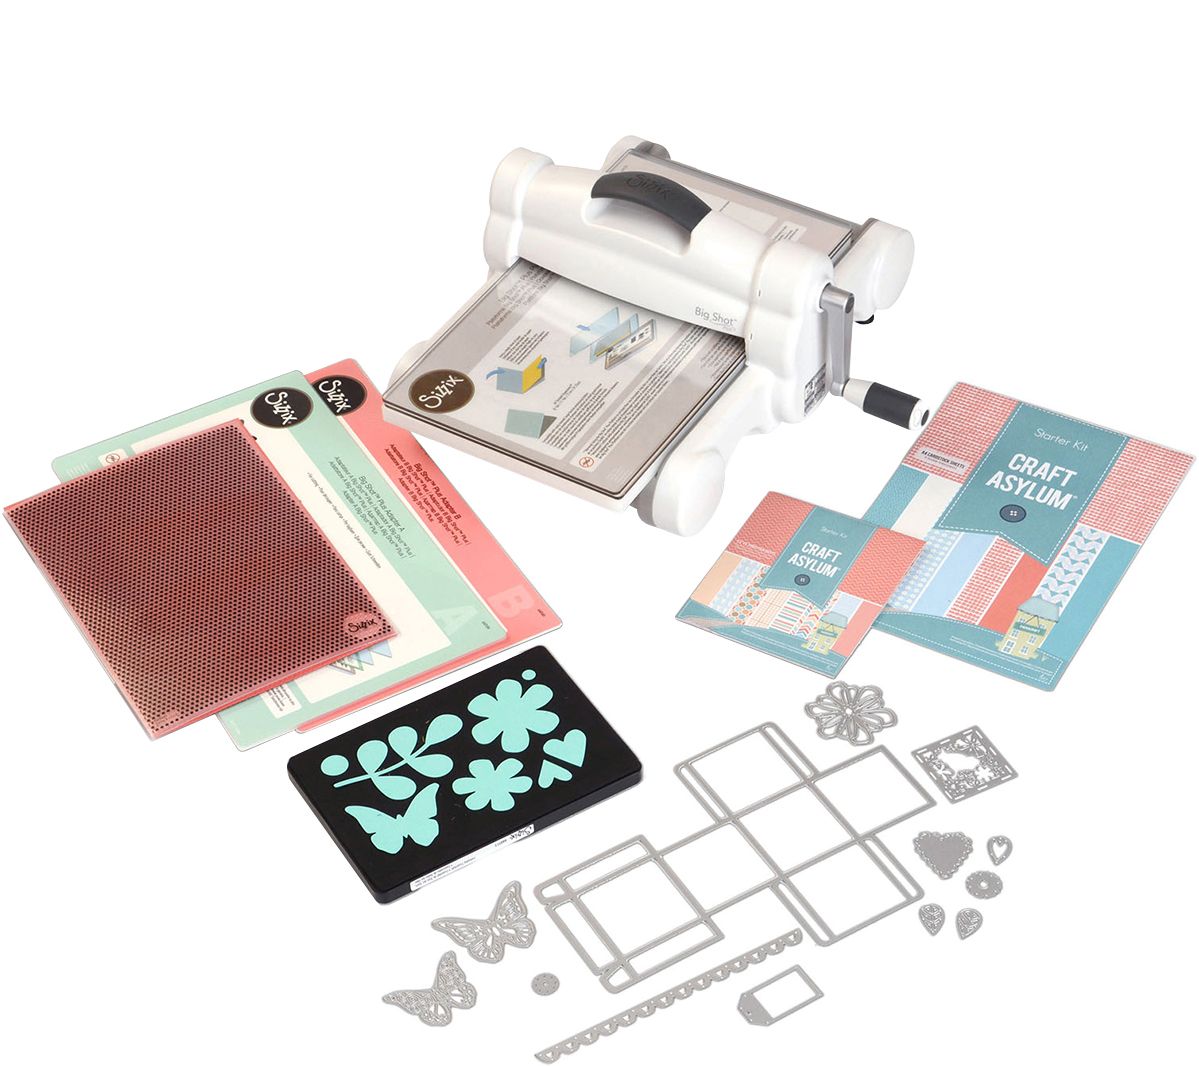  Sizzix Big Shot Plus A4 Die Cutting and Embossing